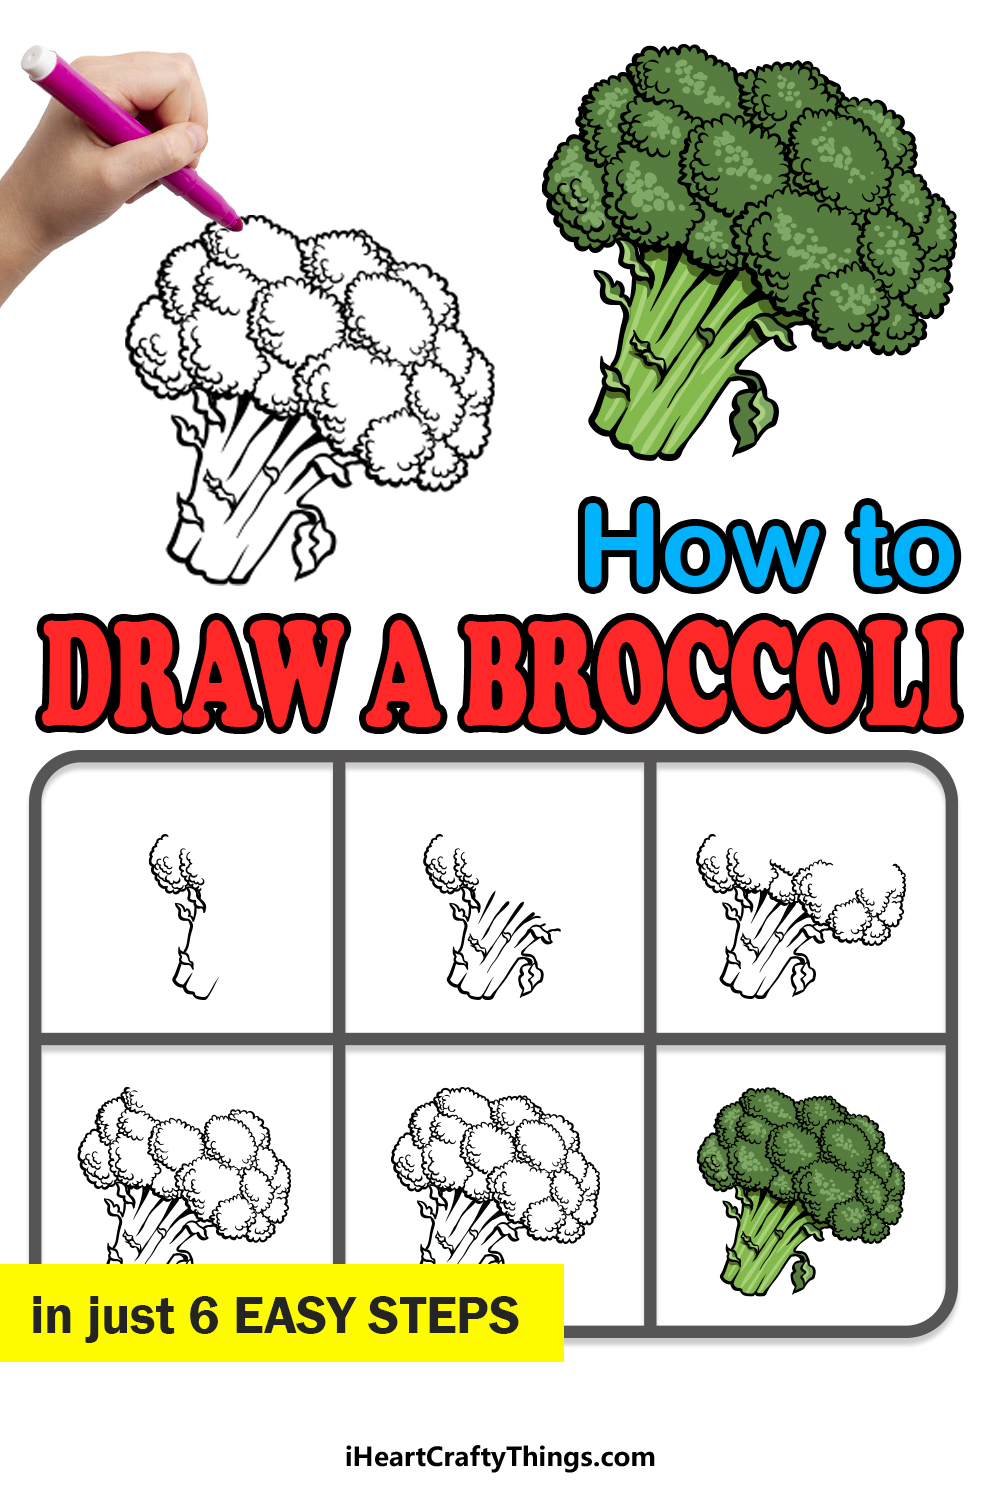 how to draw Broccoli in 6 easy steps